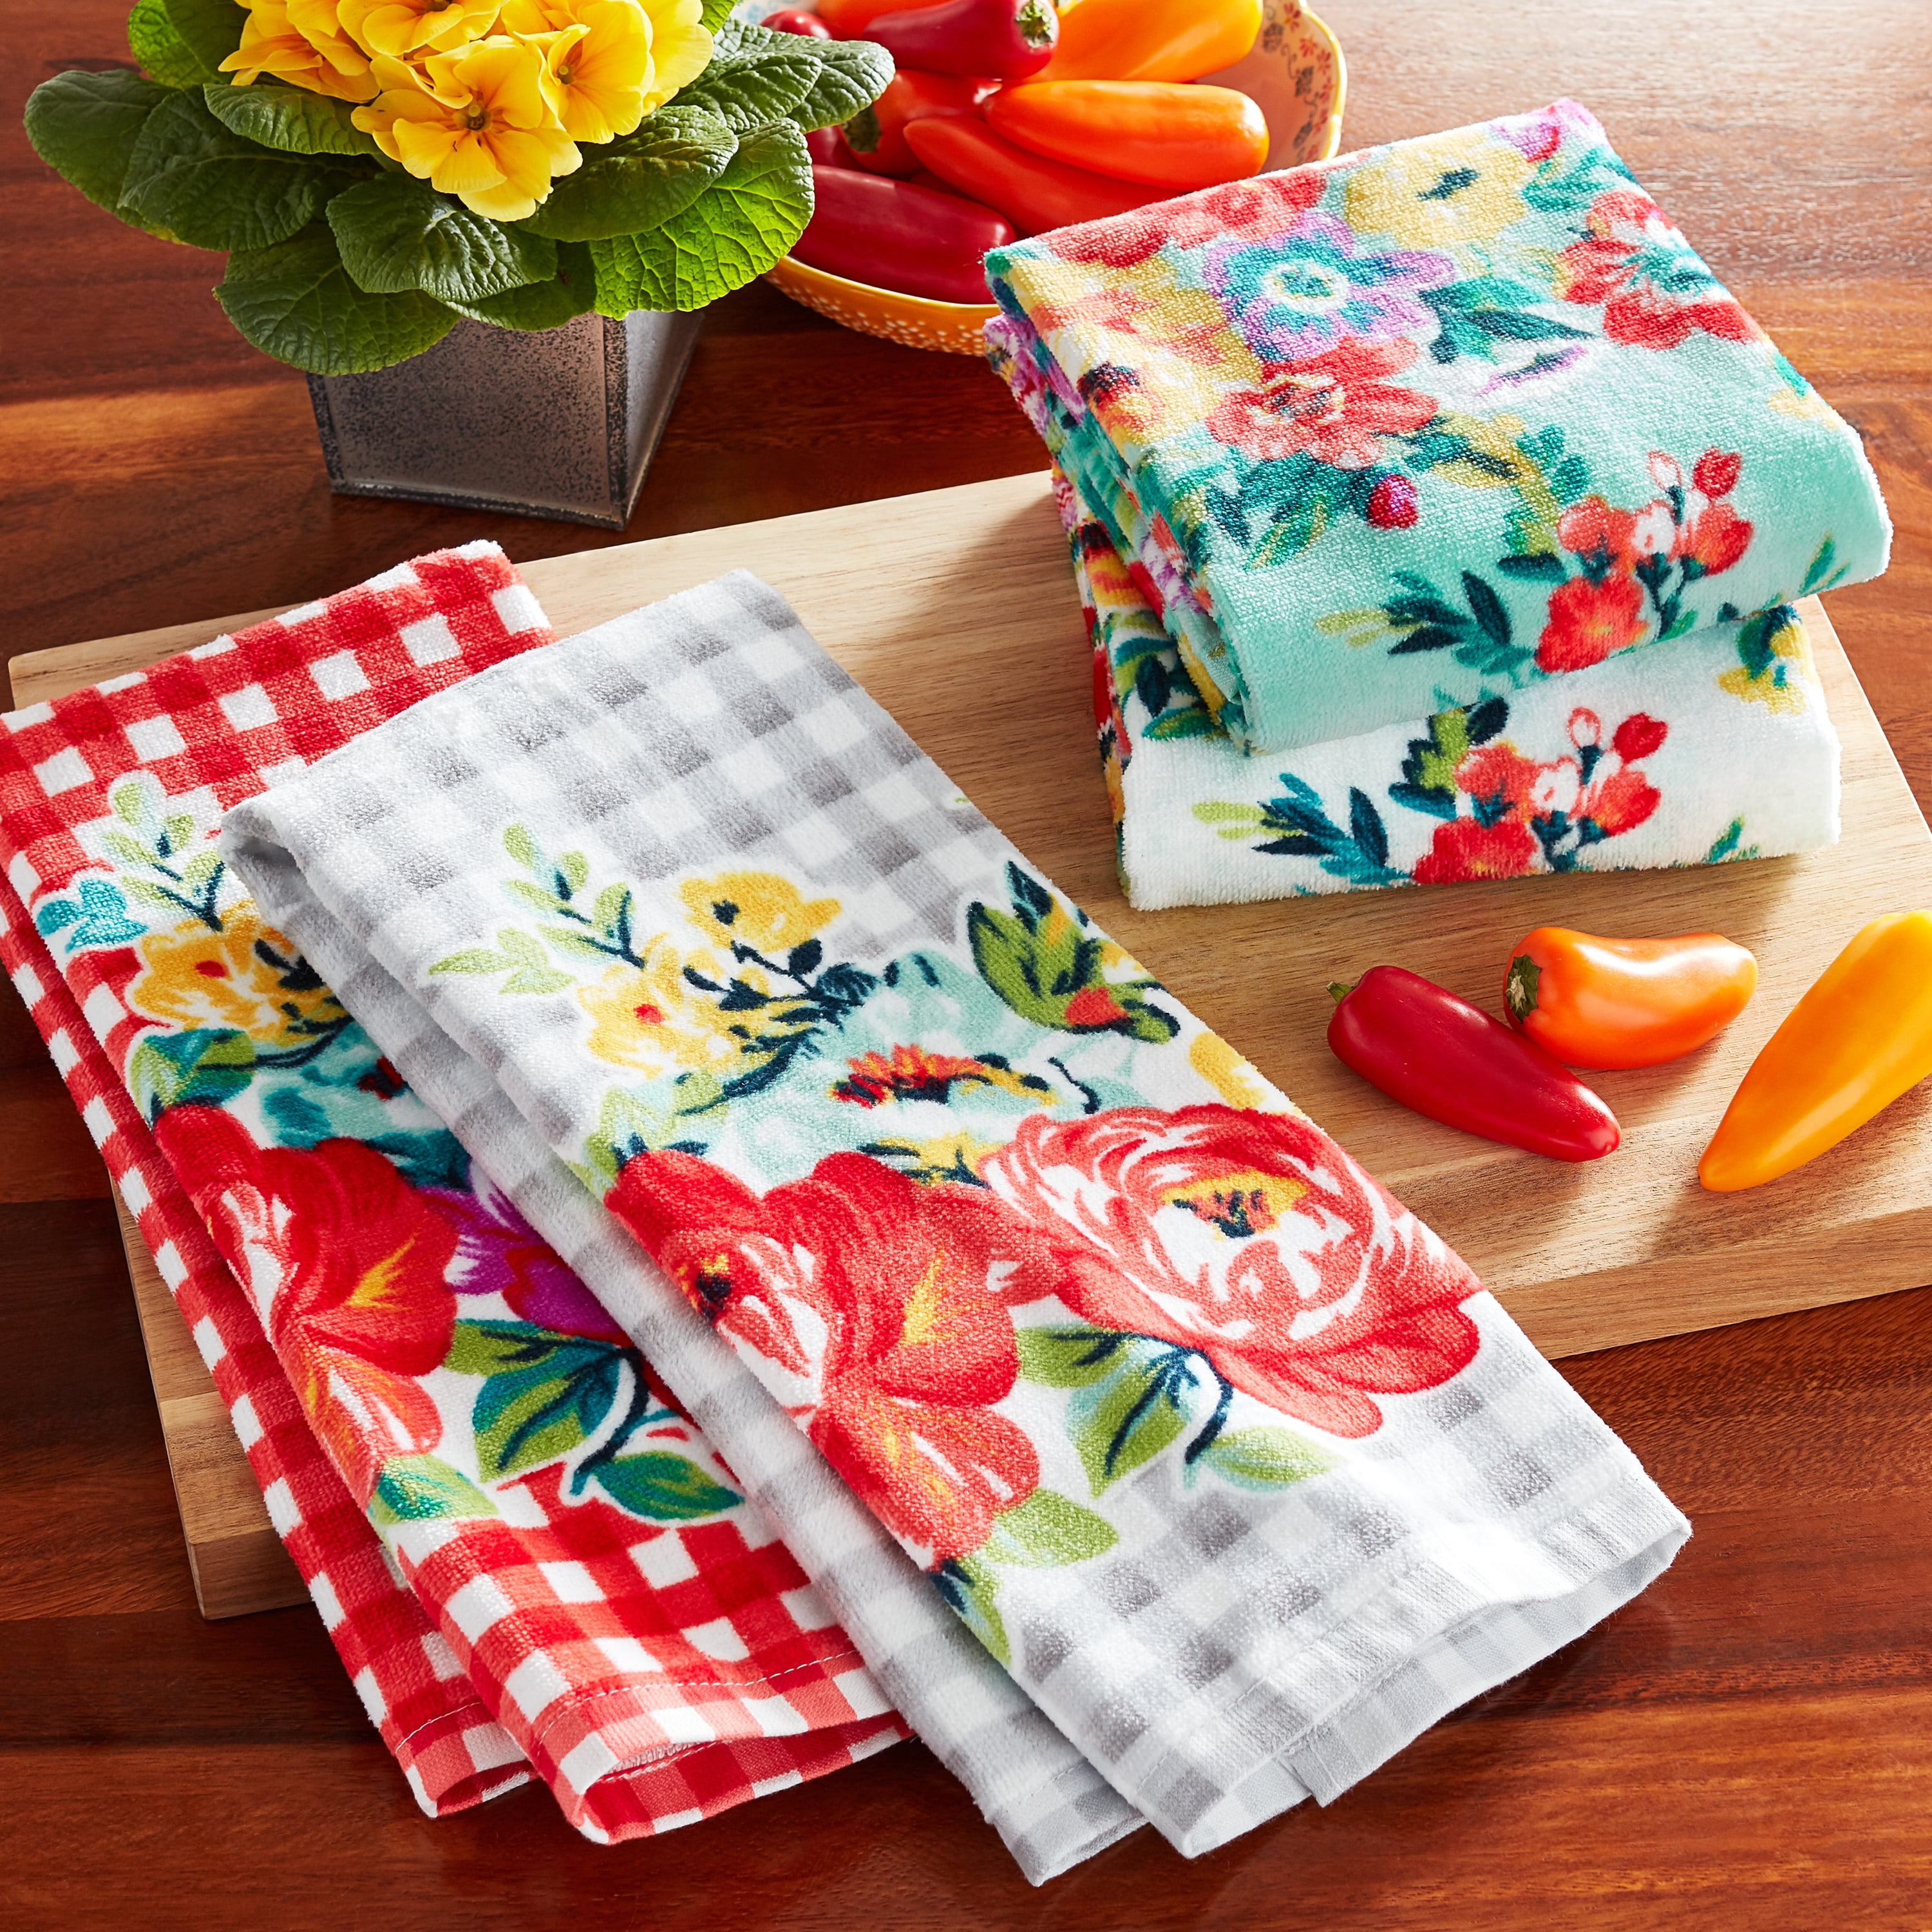 2 x The Pioneer Woman Kitchen Towels Wildflower Whimsy Set of 2 16